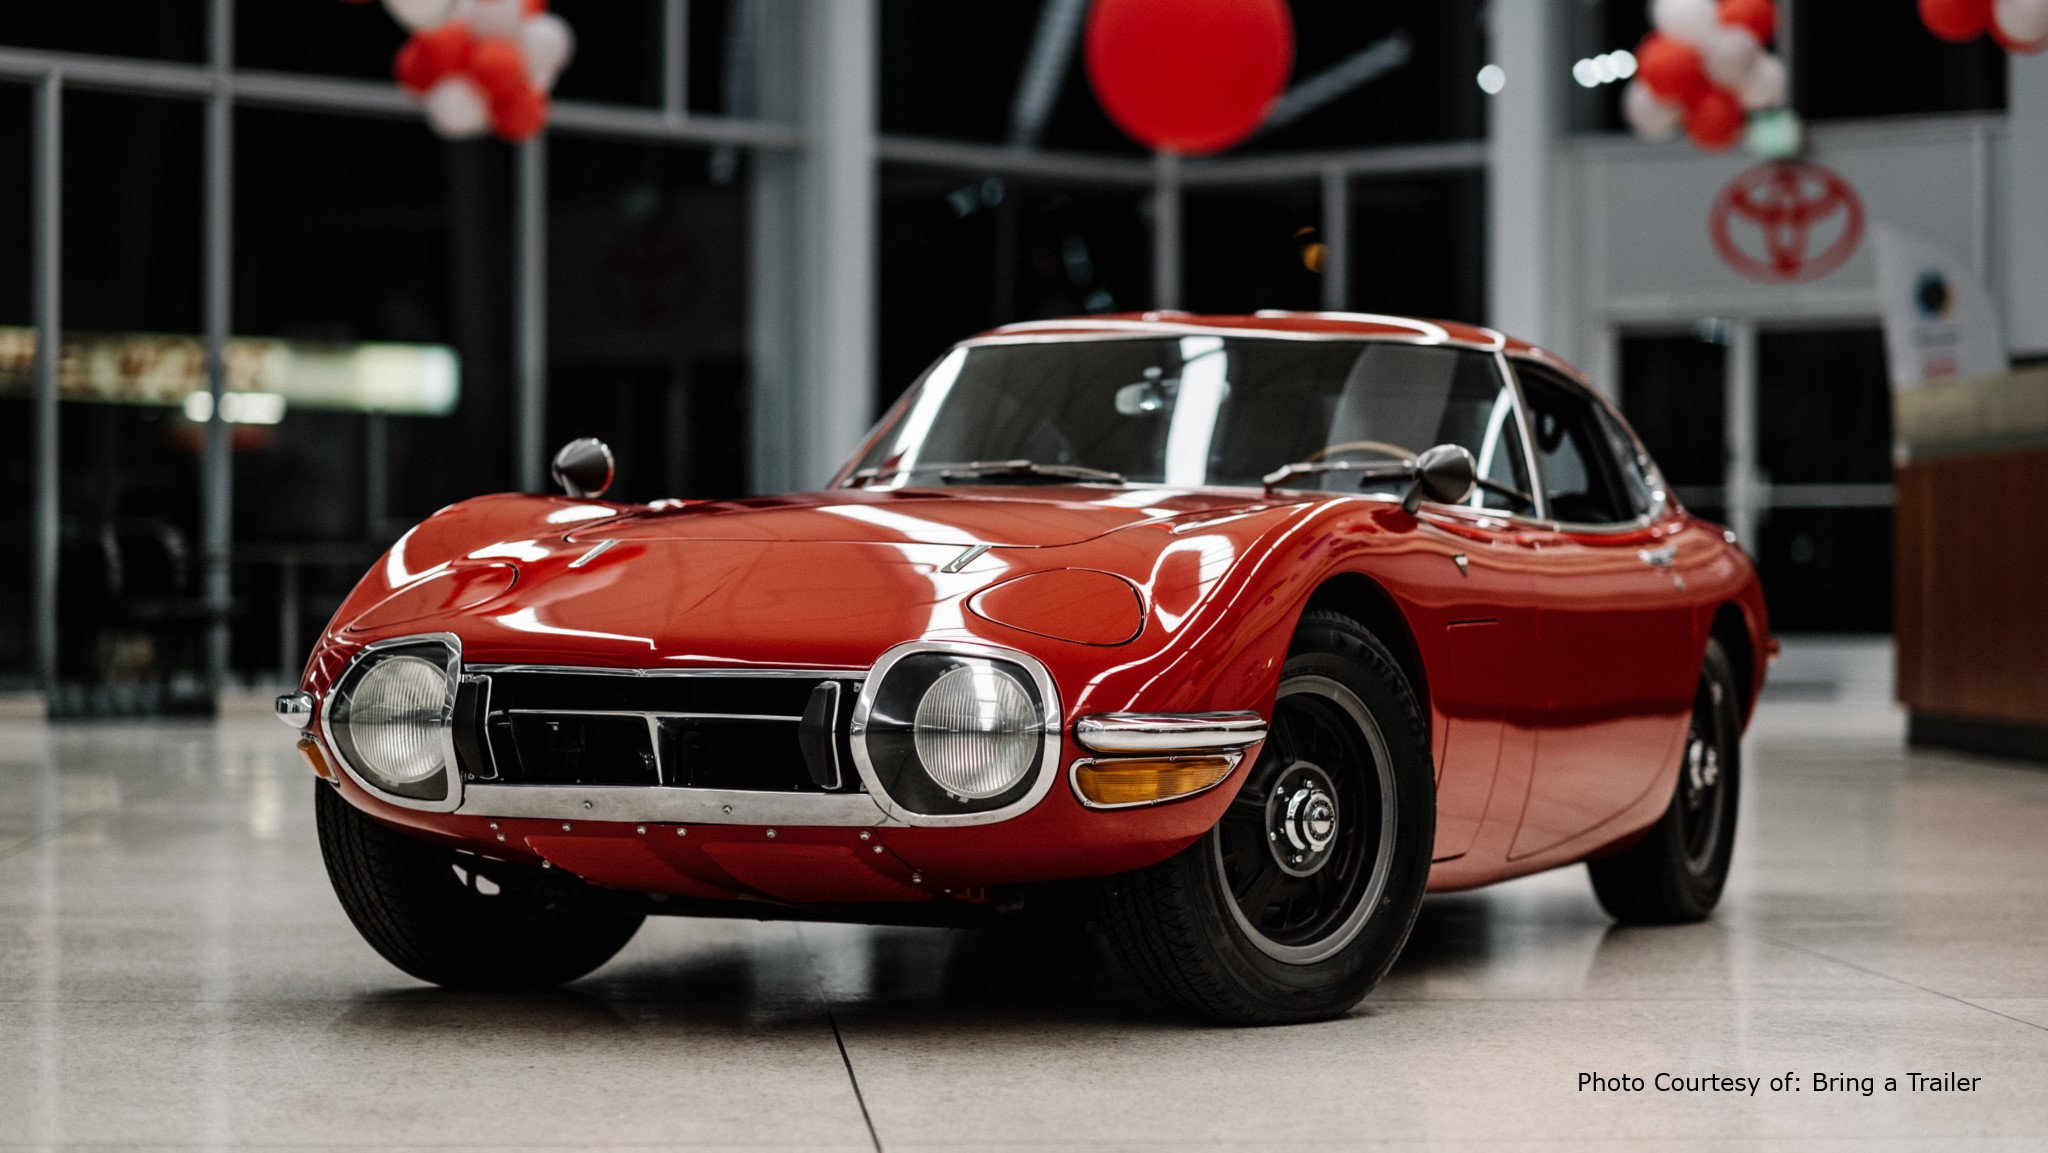 Rare LHD Toyota 2000GT Sold at Auction | Clublexus